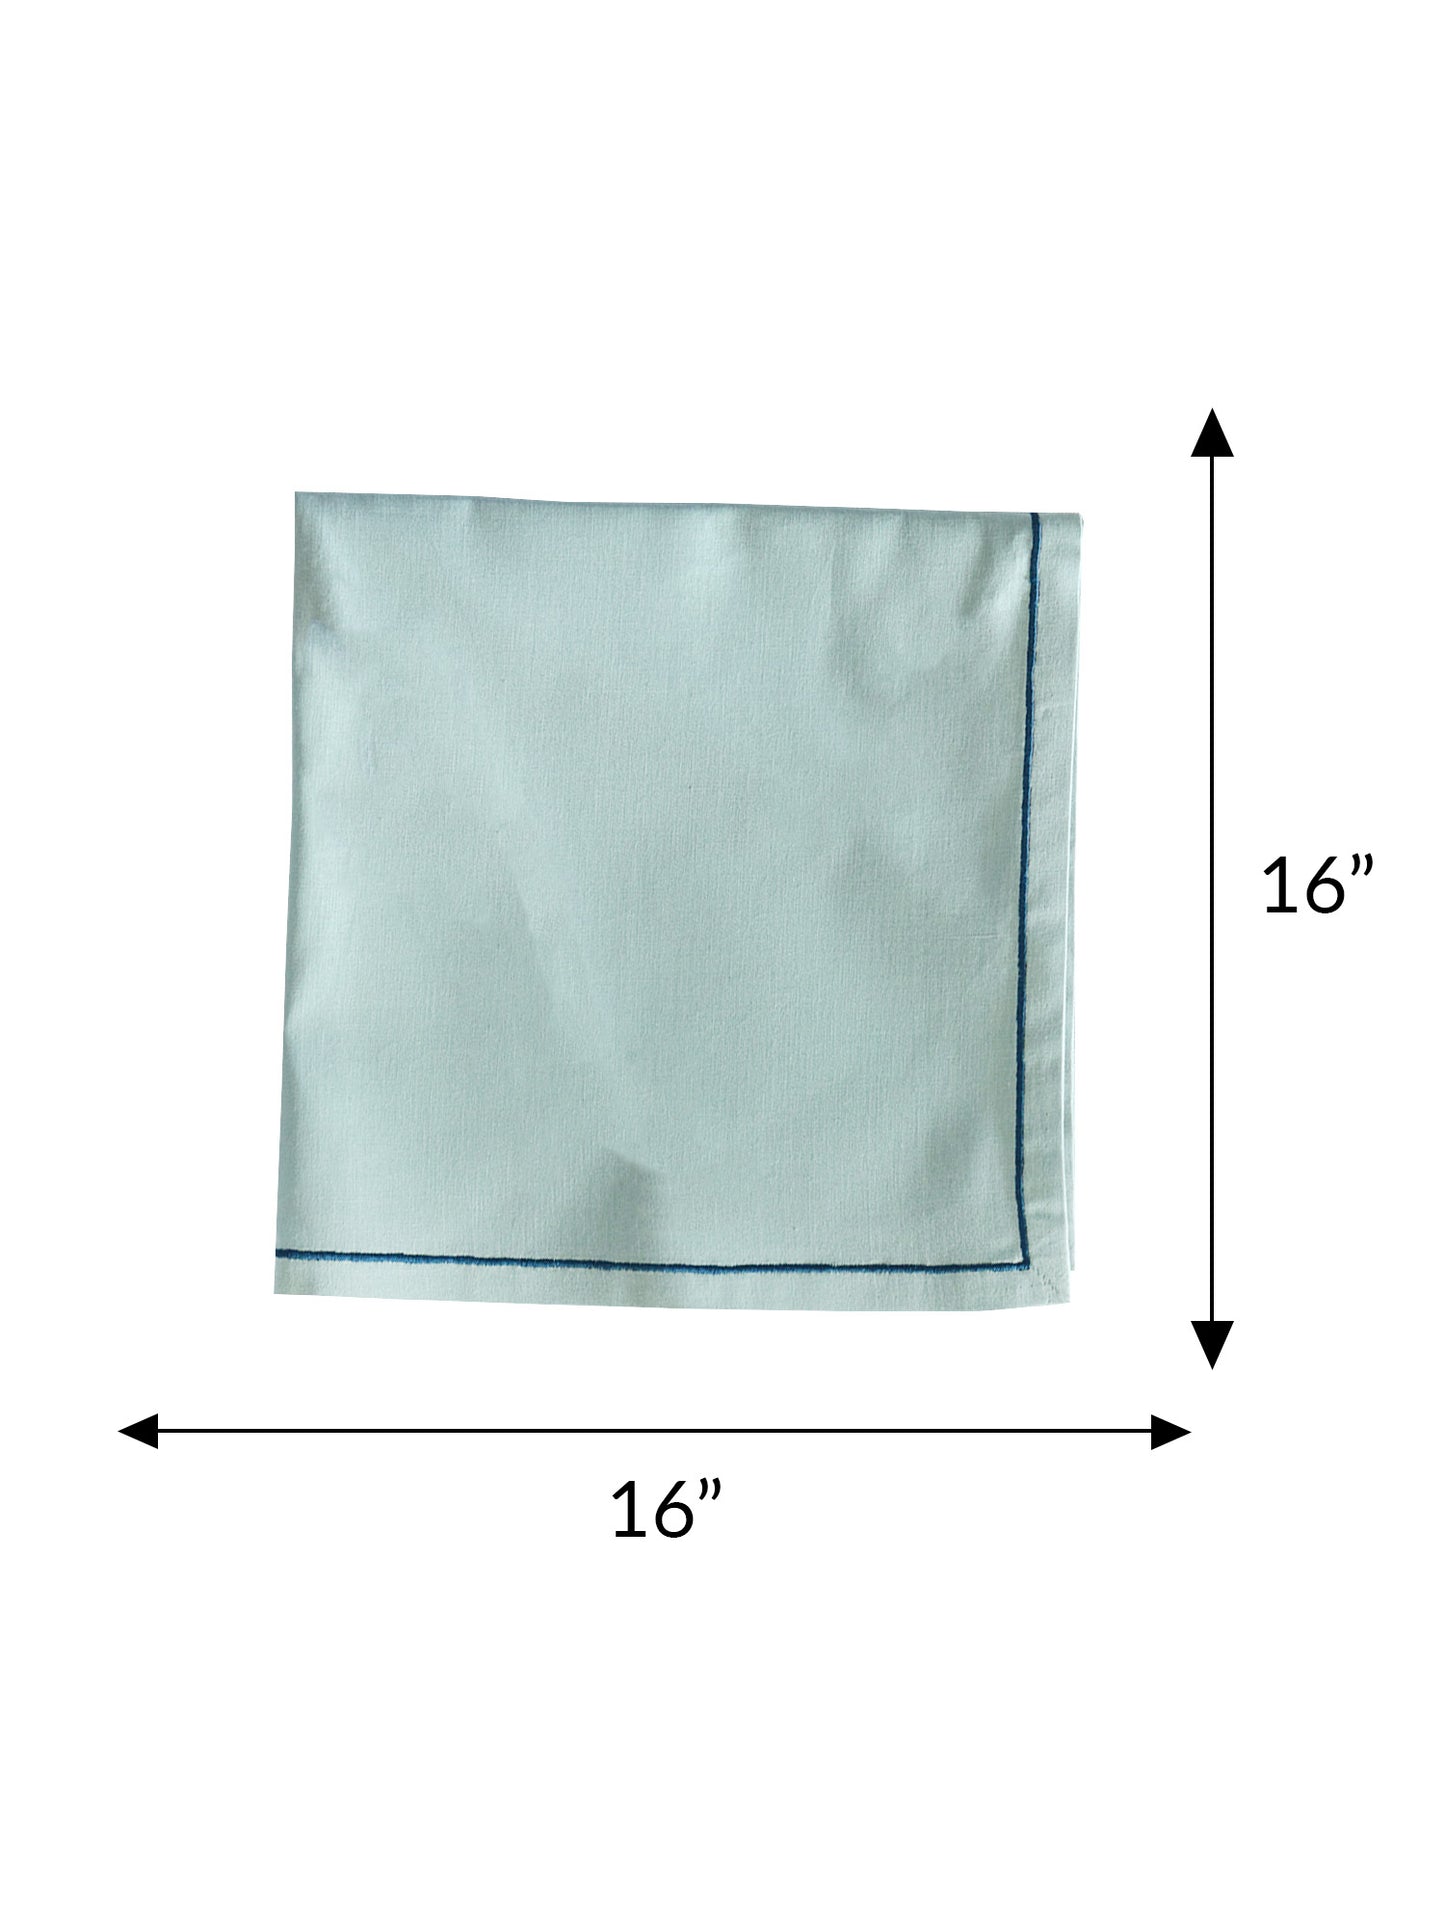 set of 6, embroidered napkins in blue - 16x16 inch